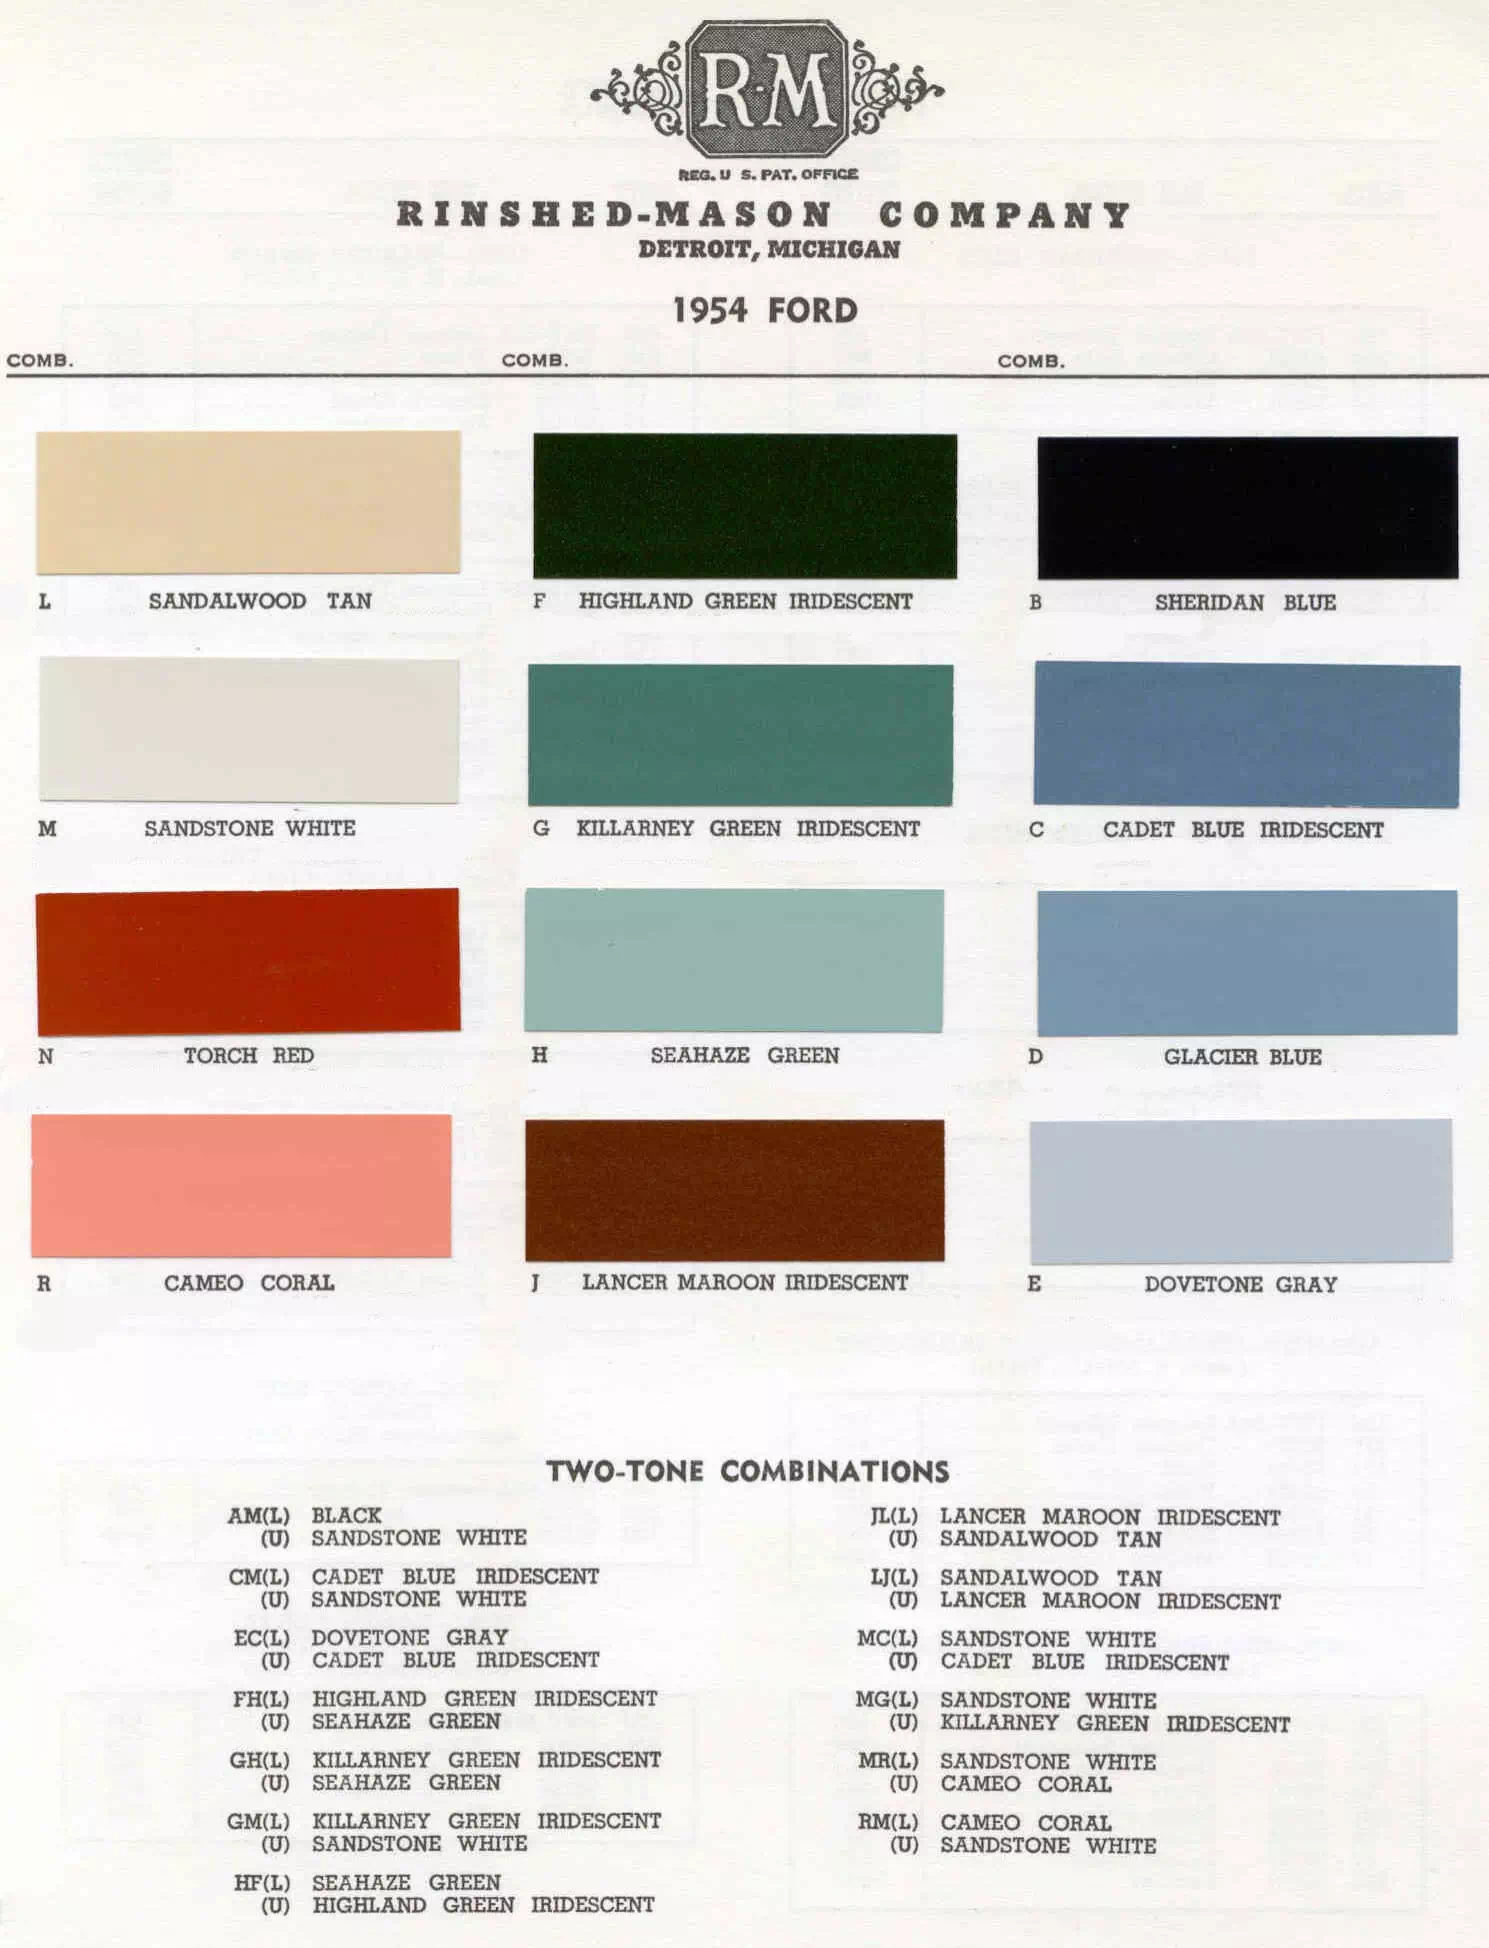 exterior colors, their codes, and example swatches used on the exterior of the vehicles in 1954